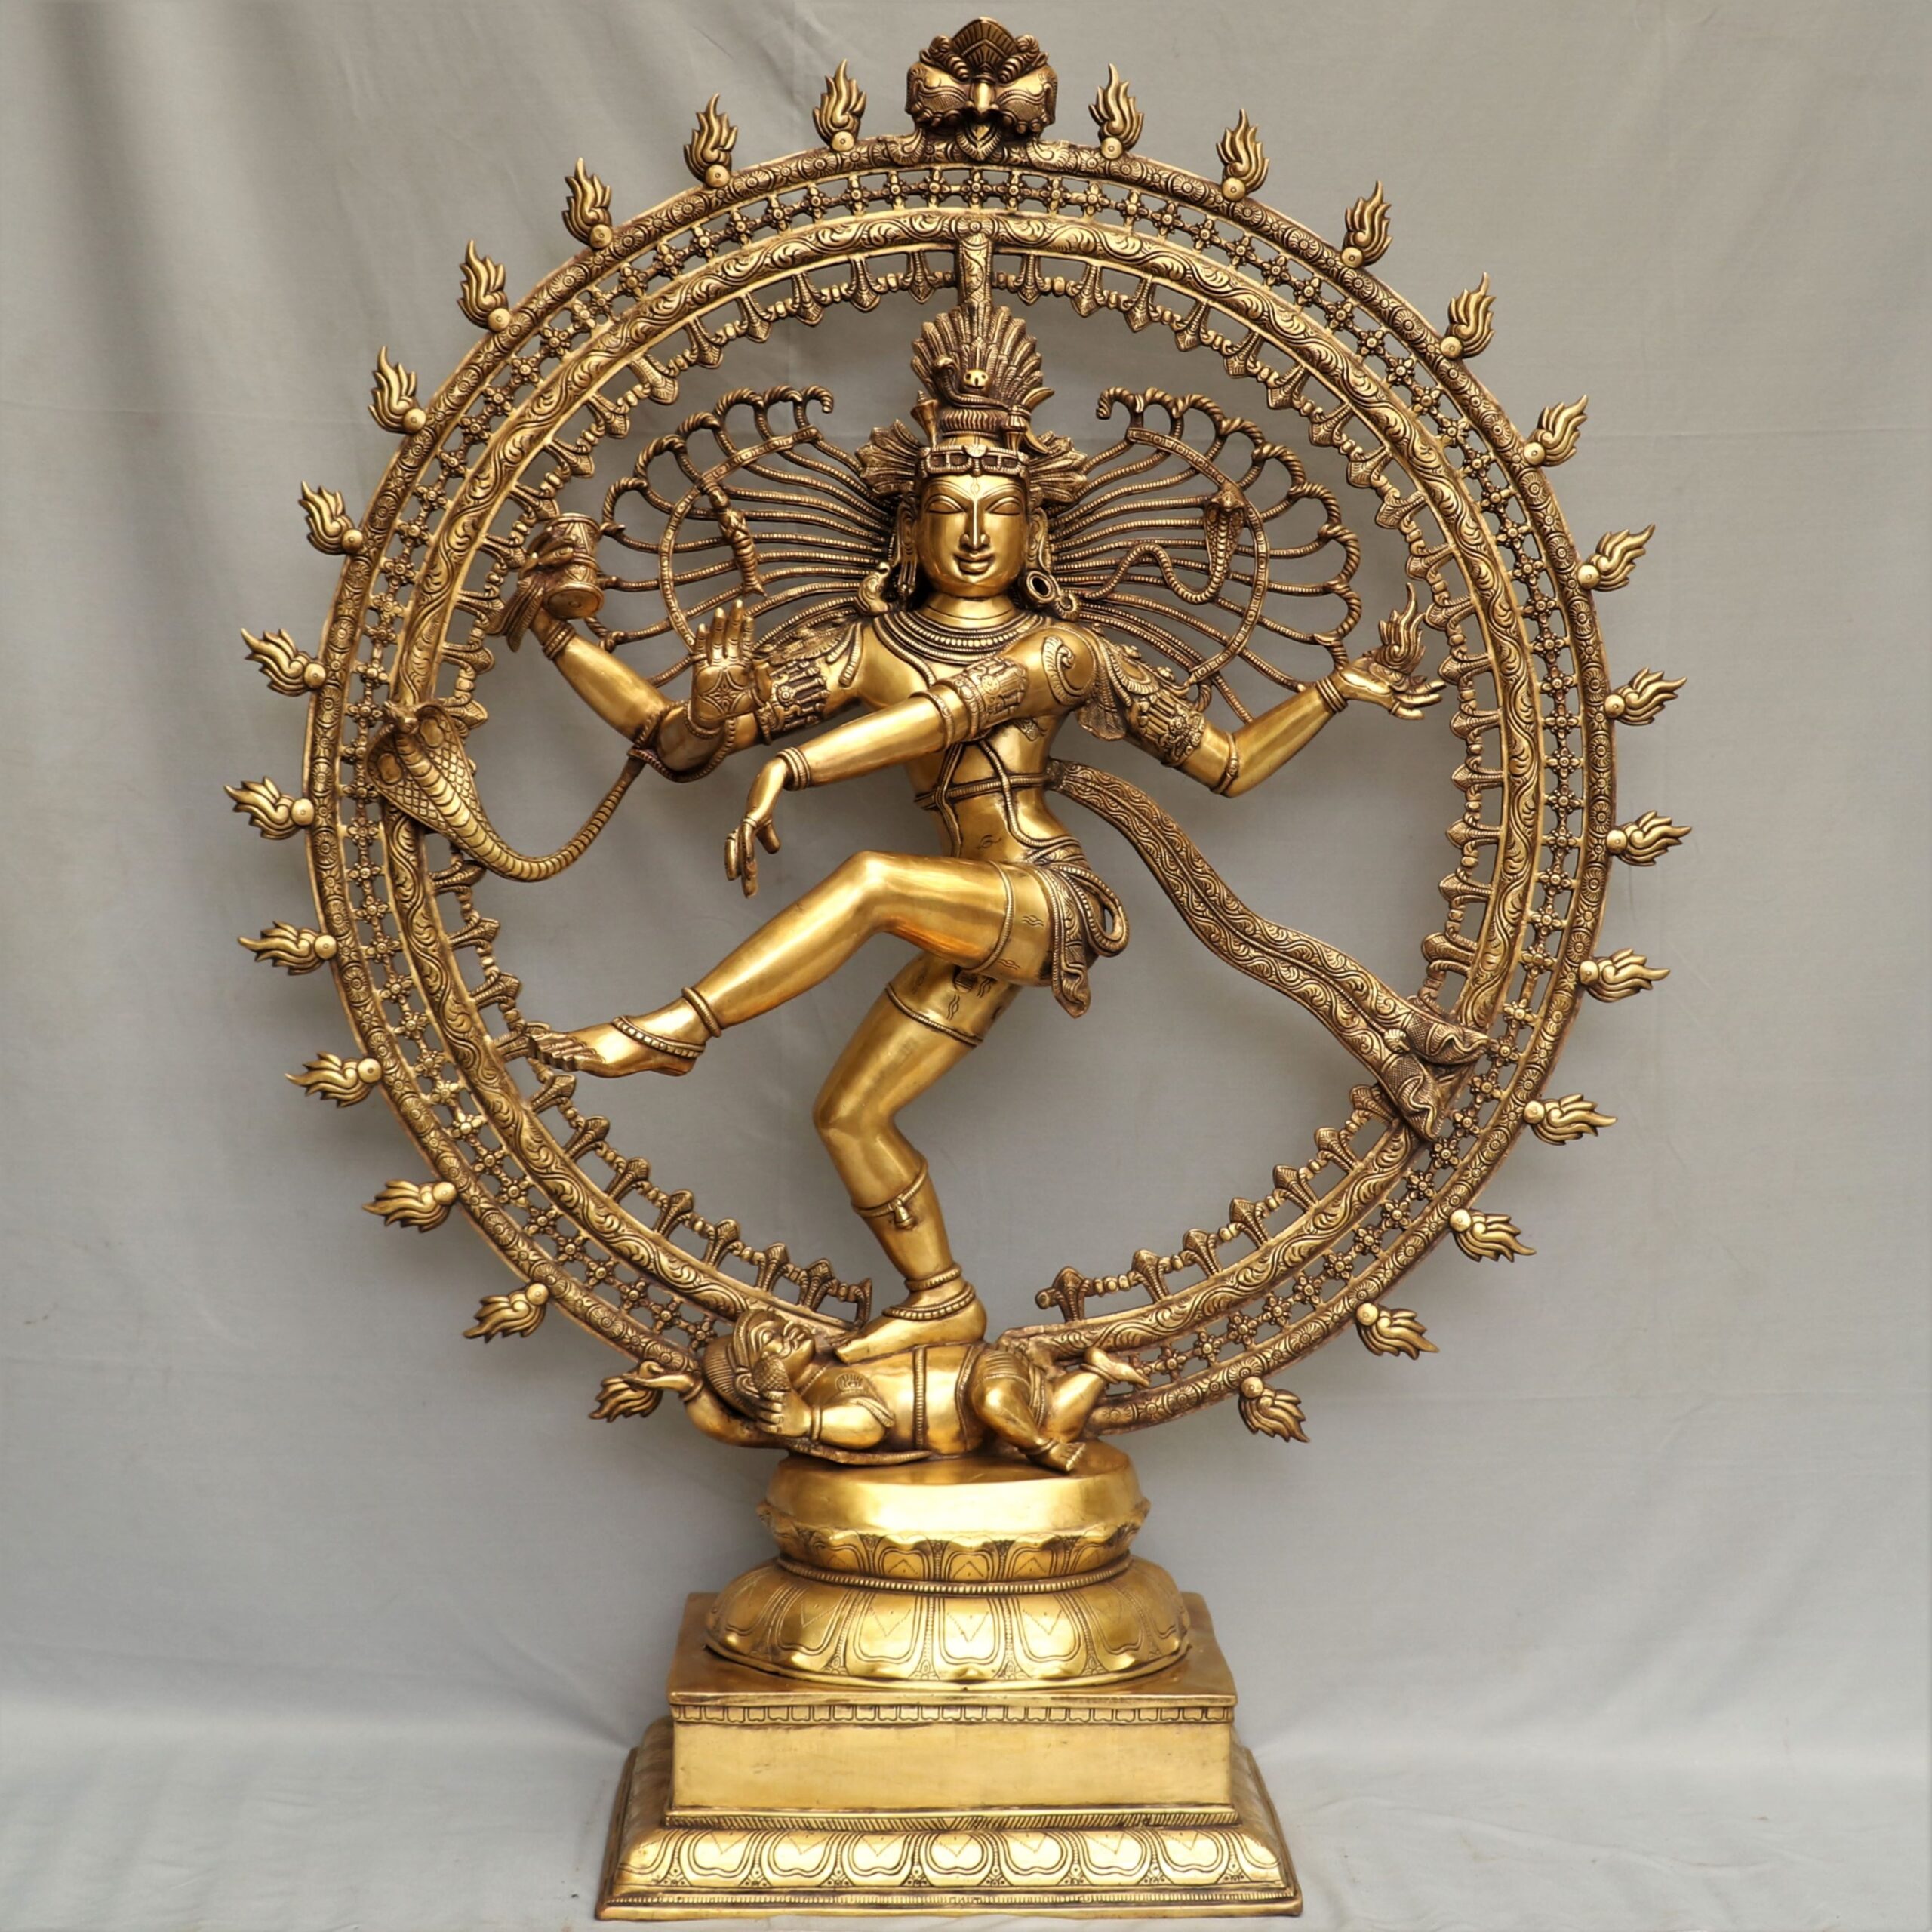 NATARAJA STATUE - Buy exclusive brass statues, collectibles and decor